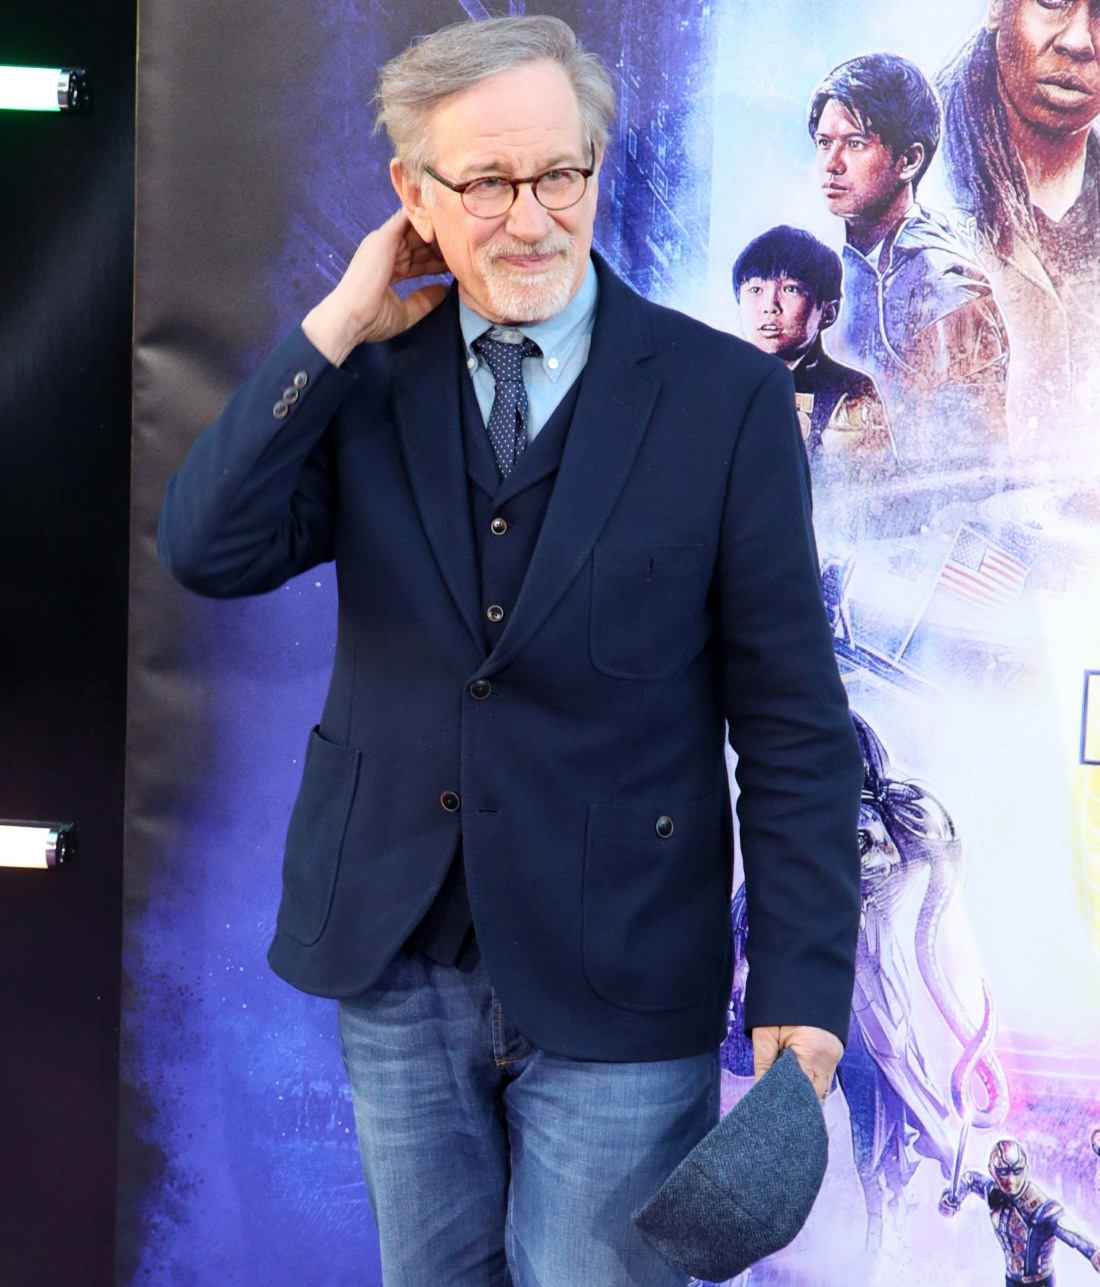 'Ready Player One' film premiere